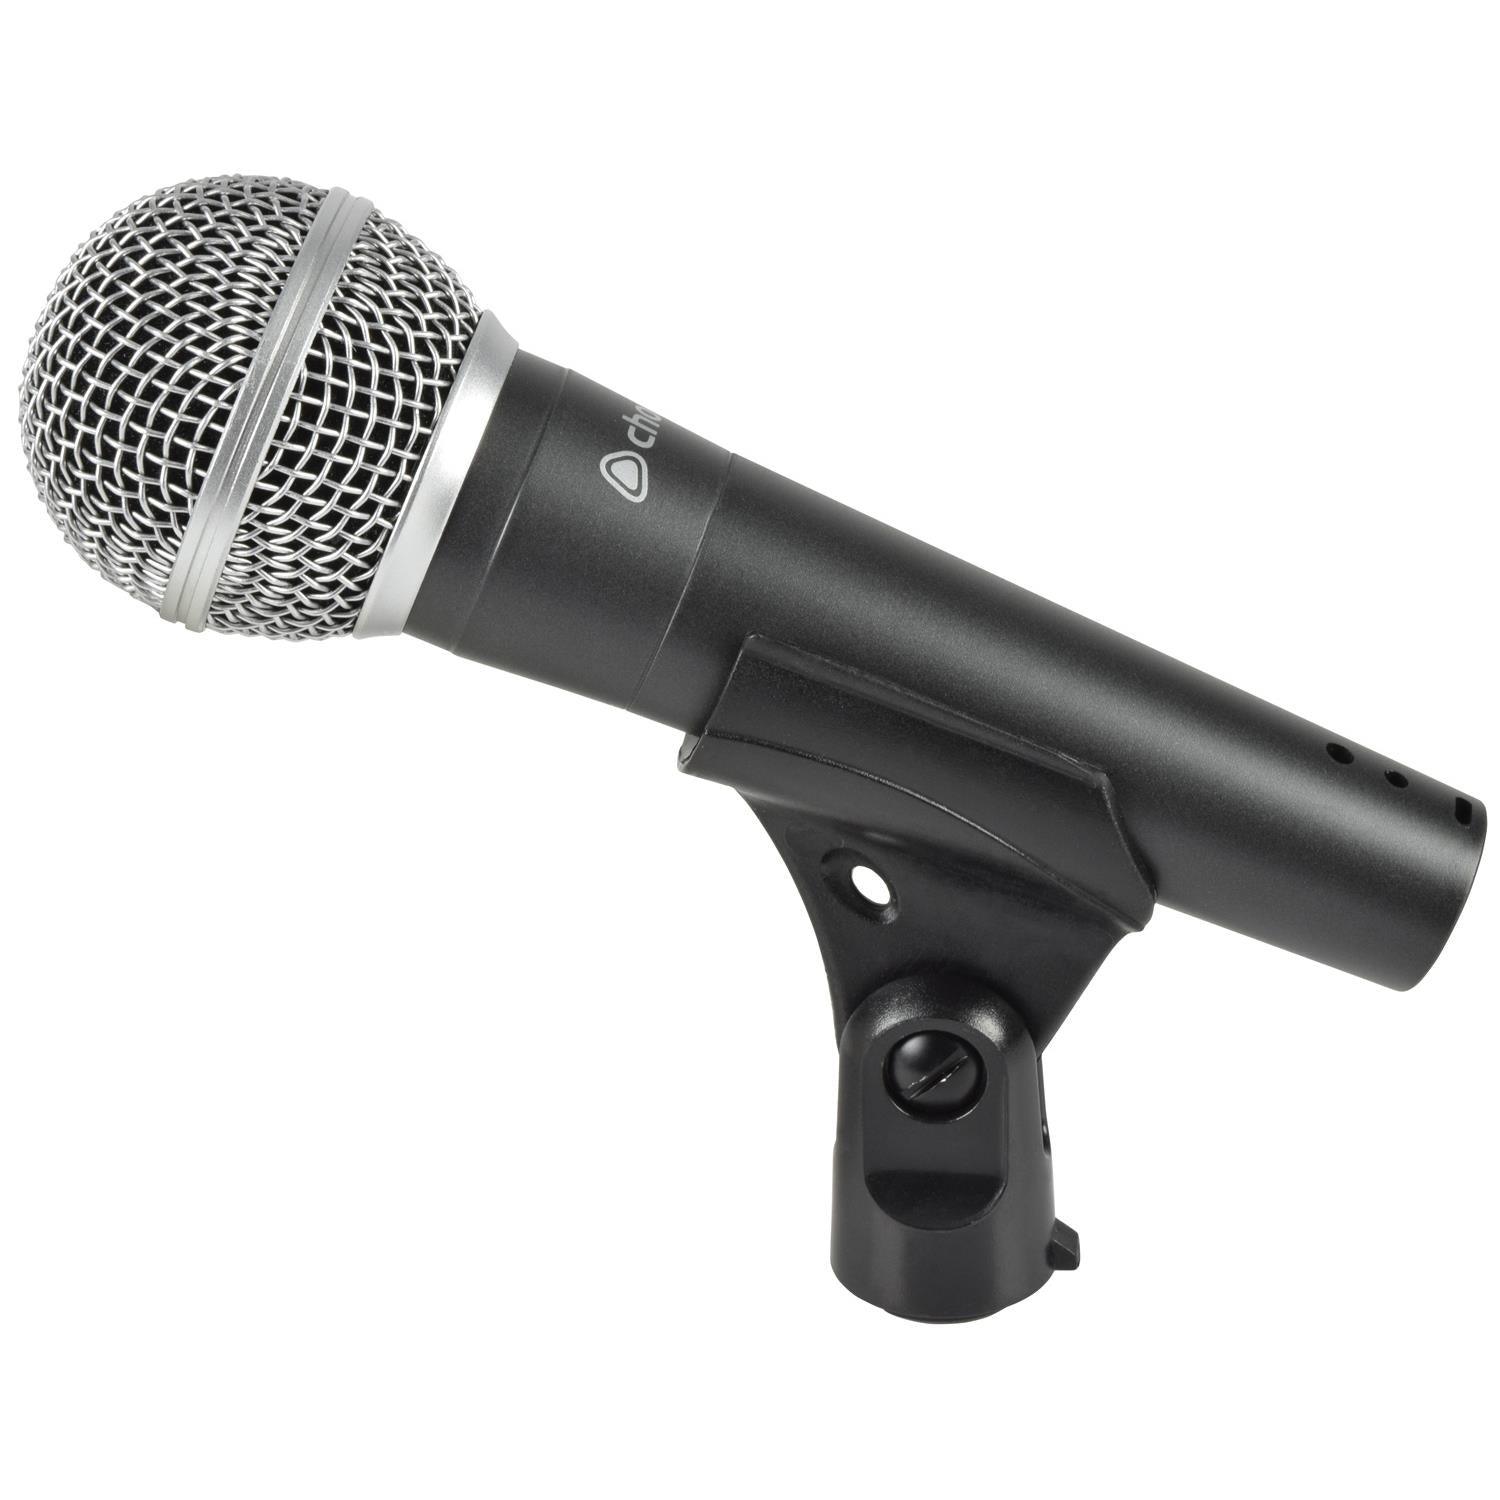 Chord DM02 Dynamic Vocal Microphone - DY Pro Audio